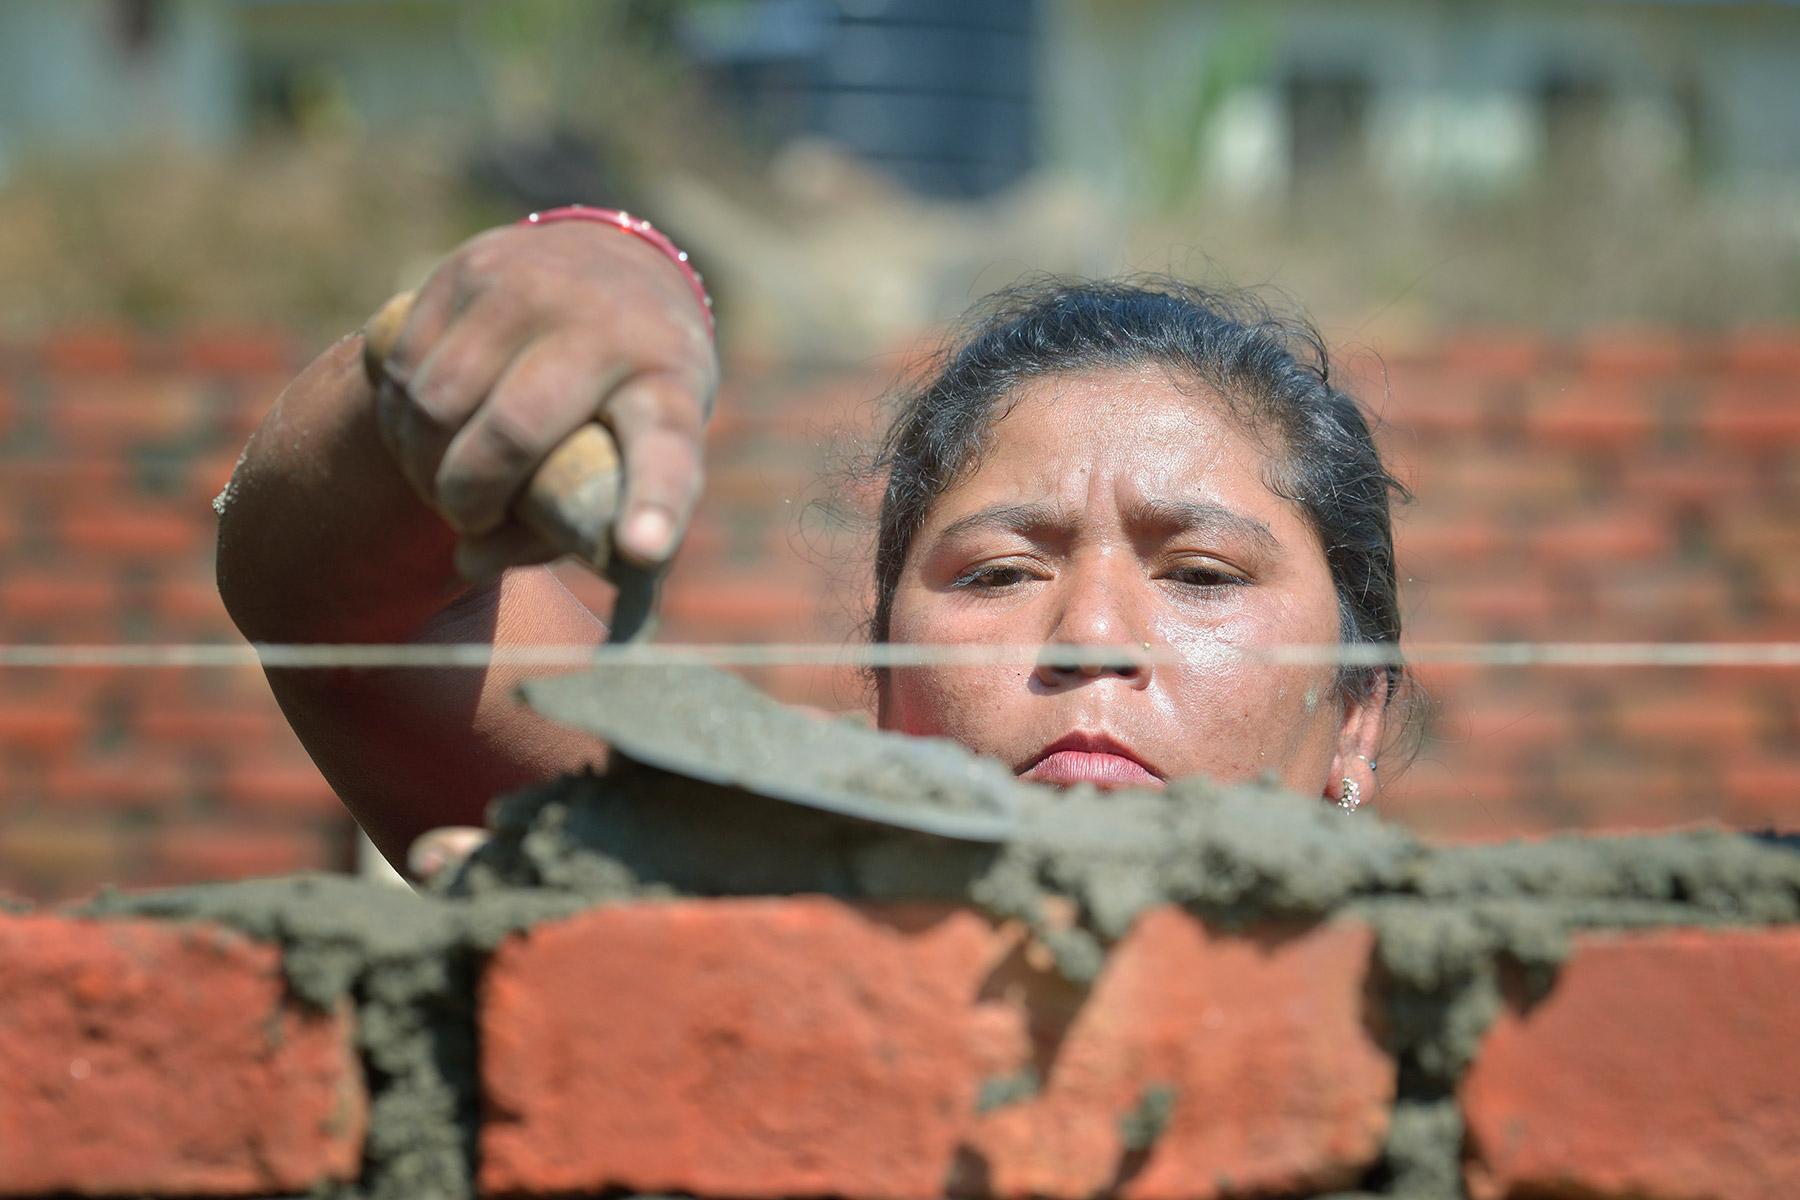 Bhagwati Tamang lays bricks in Jogimara village in central Nepal after the devastating earthquake of April 2015. Following the disaster, the LWF worked jointly with Islamic Relief Worldwide and other partners to provide shelter in remote villages where thousands lost homes and livelihoods. Photo: Paul Jeffrey/ACT